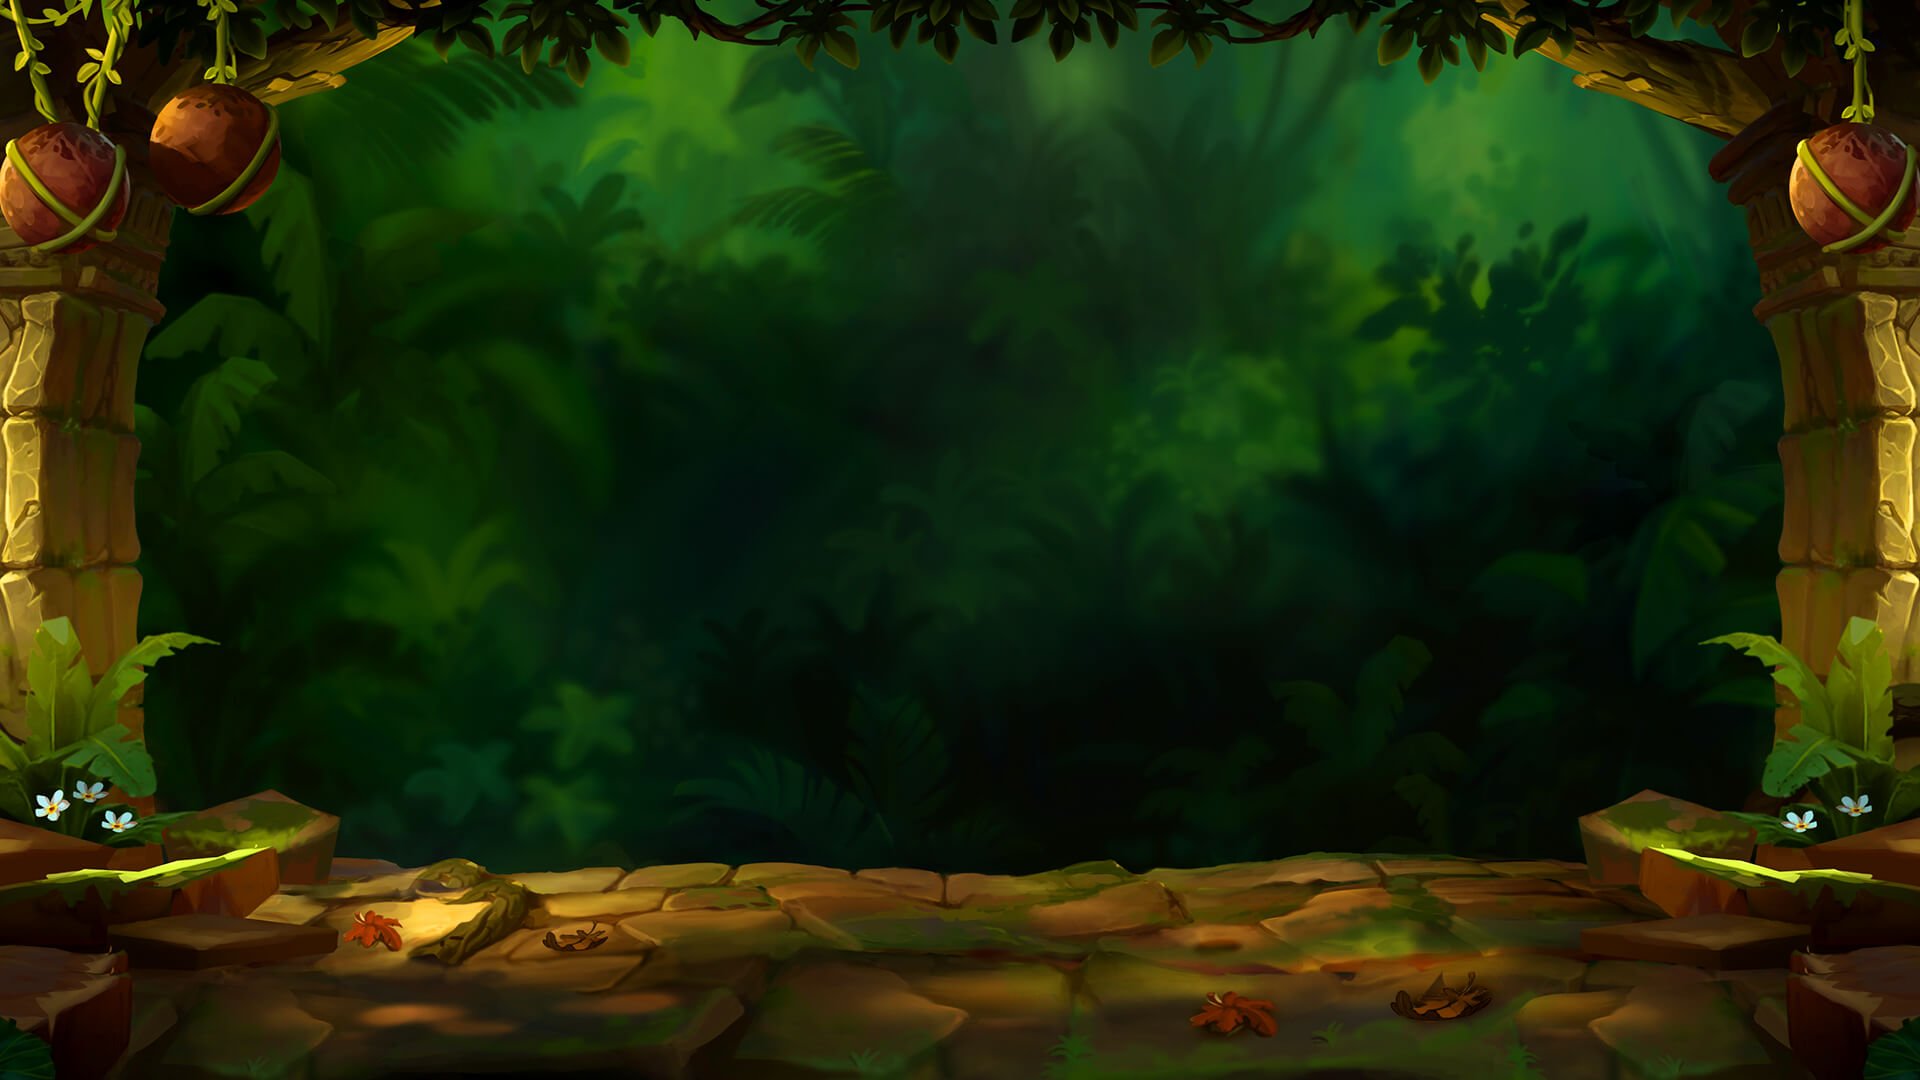 Game hight resolution background Jungle Book